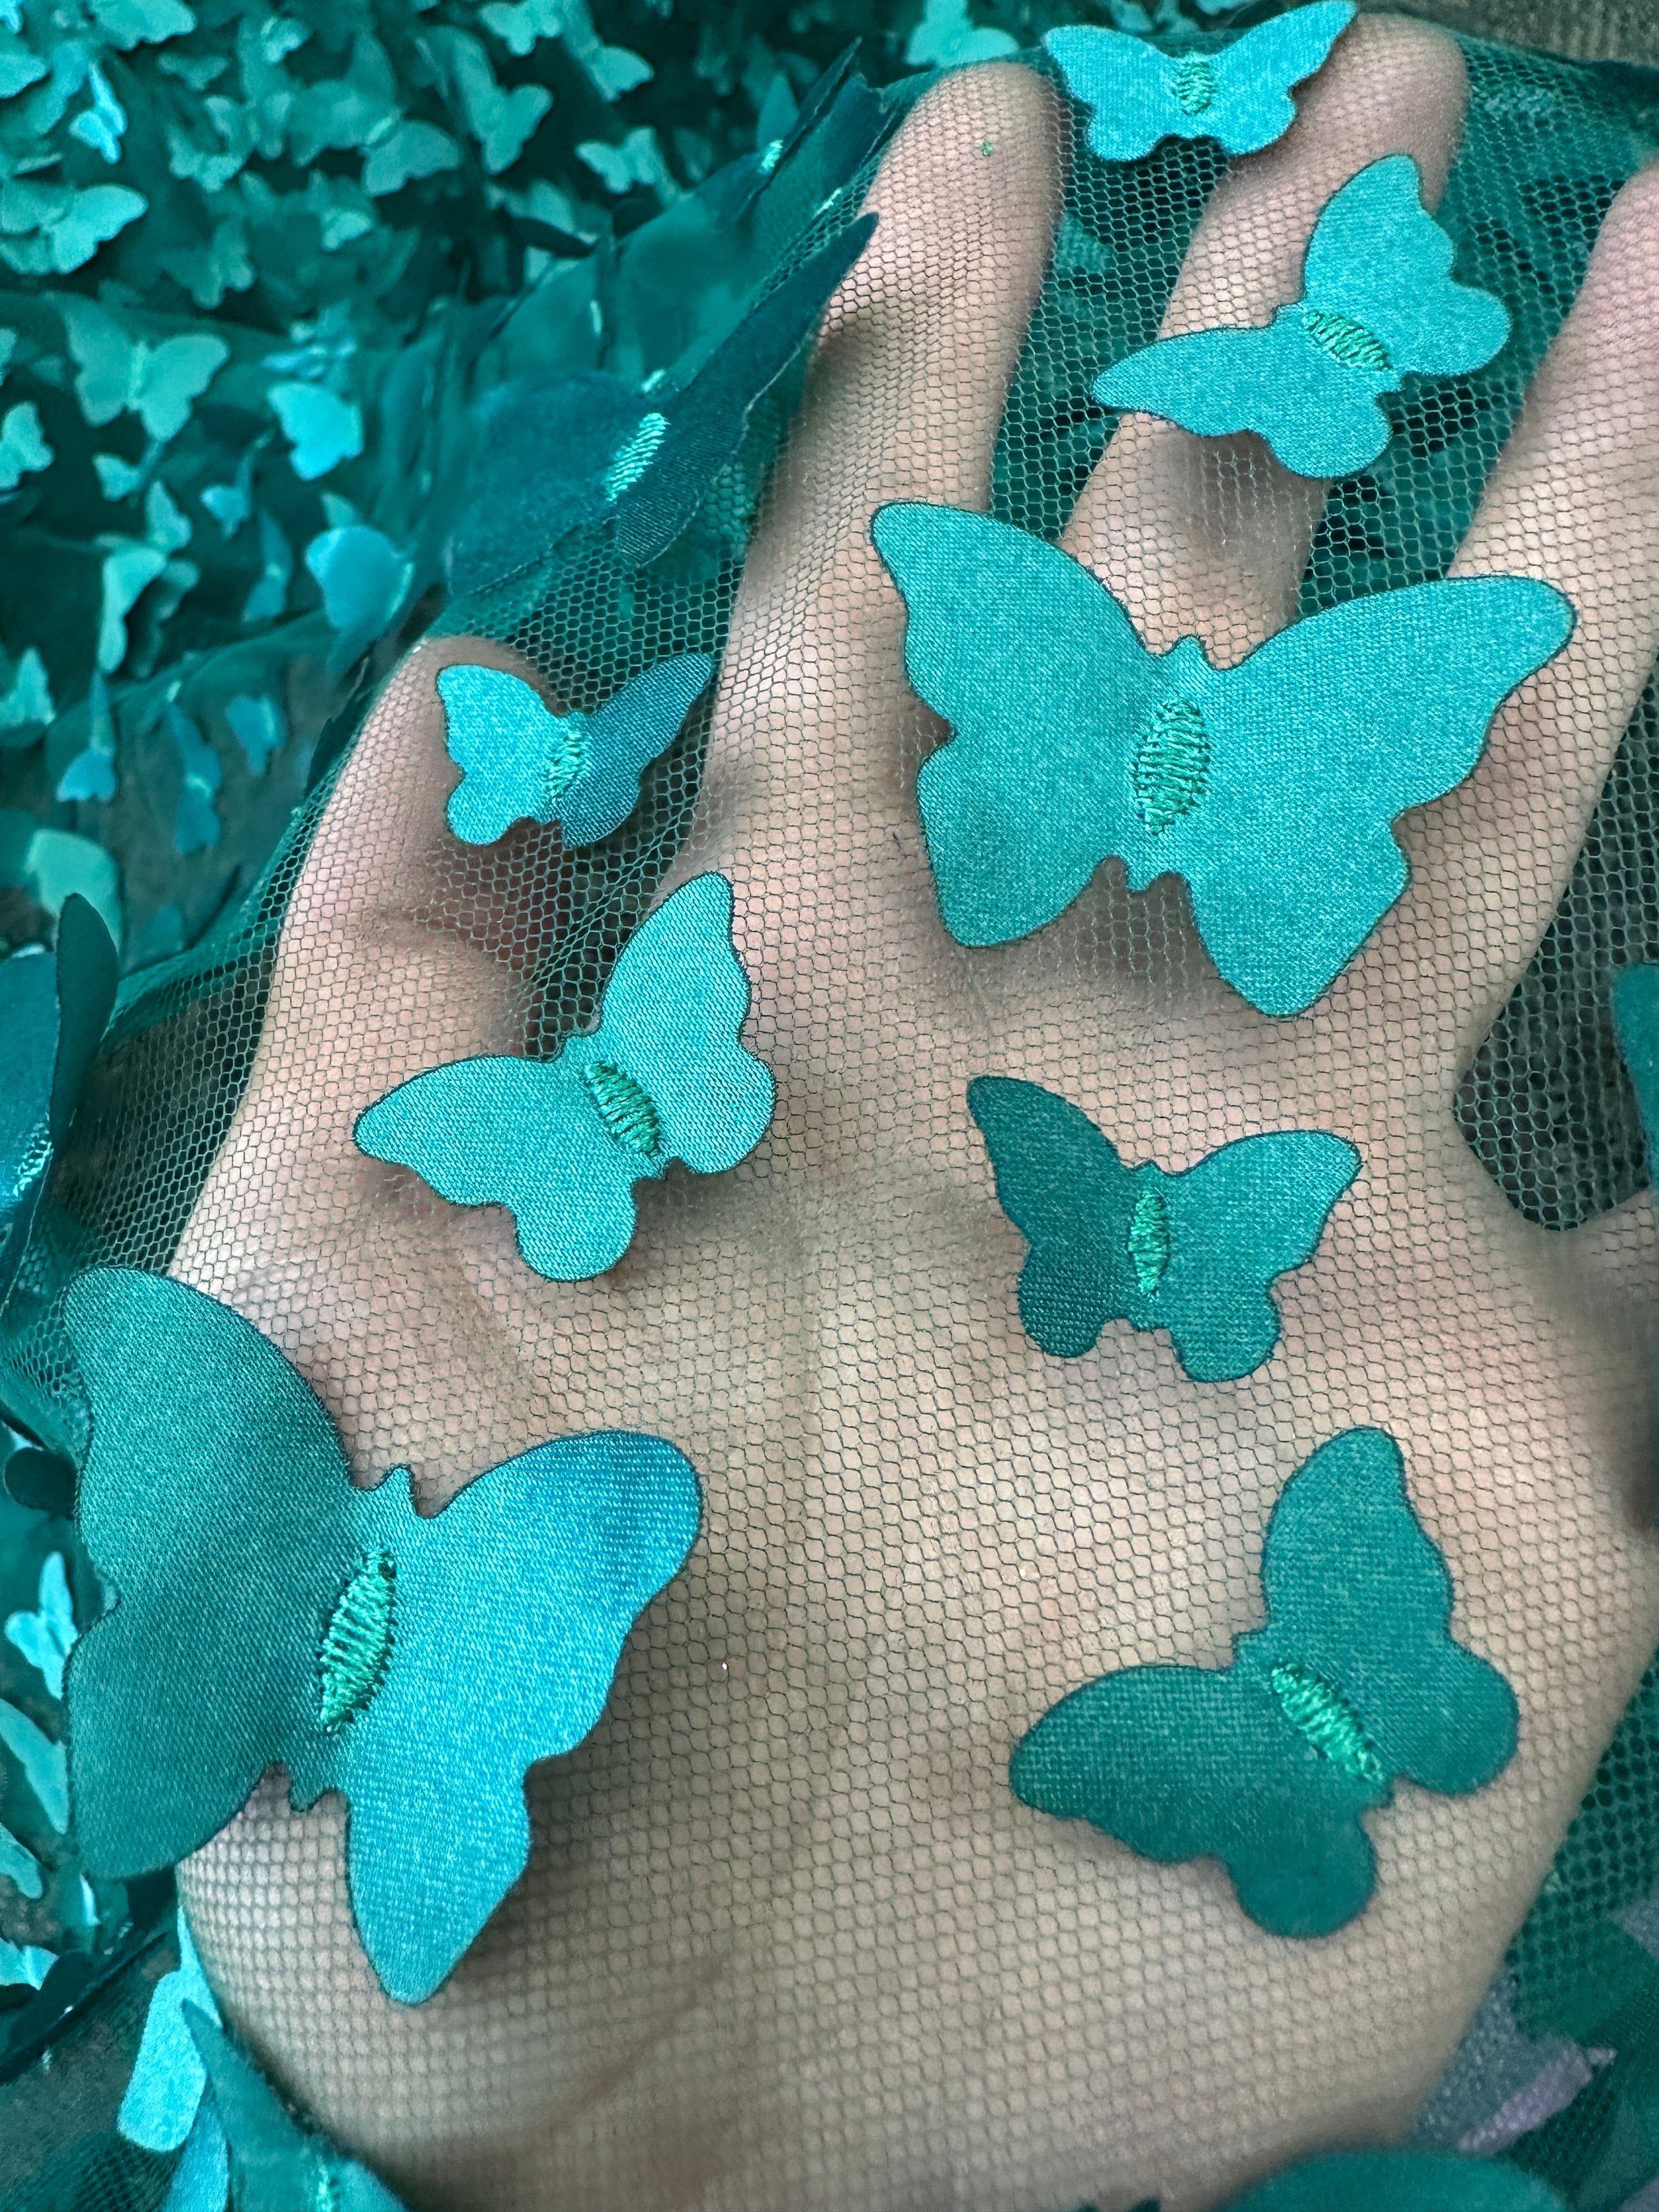 teal blue 3D Butterfly Lace, blue Butterfly Tulle By The Yard, light blue Tulle Lace Fabric, Dress Fabric, Bridal Lace Fabric, premium lace fabric, lace fabric on discount, lace fabric in low price, buy lace fabric online, lace fabric on sale